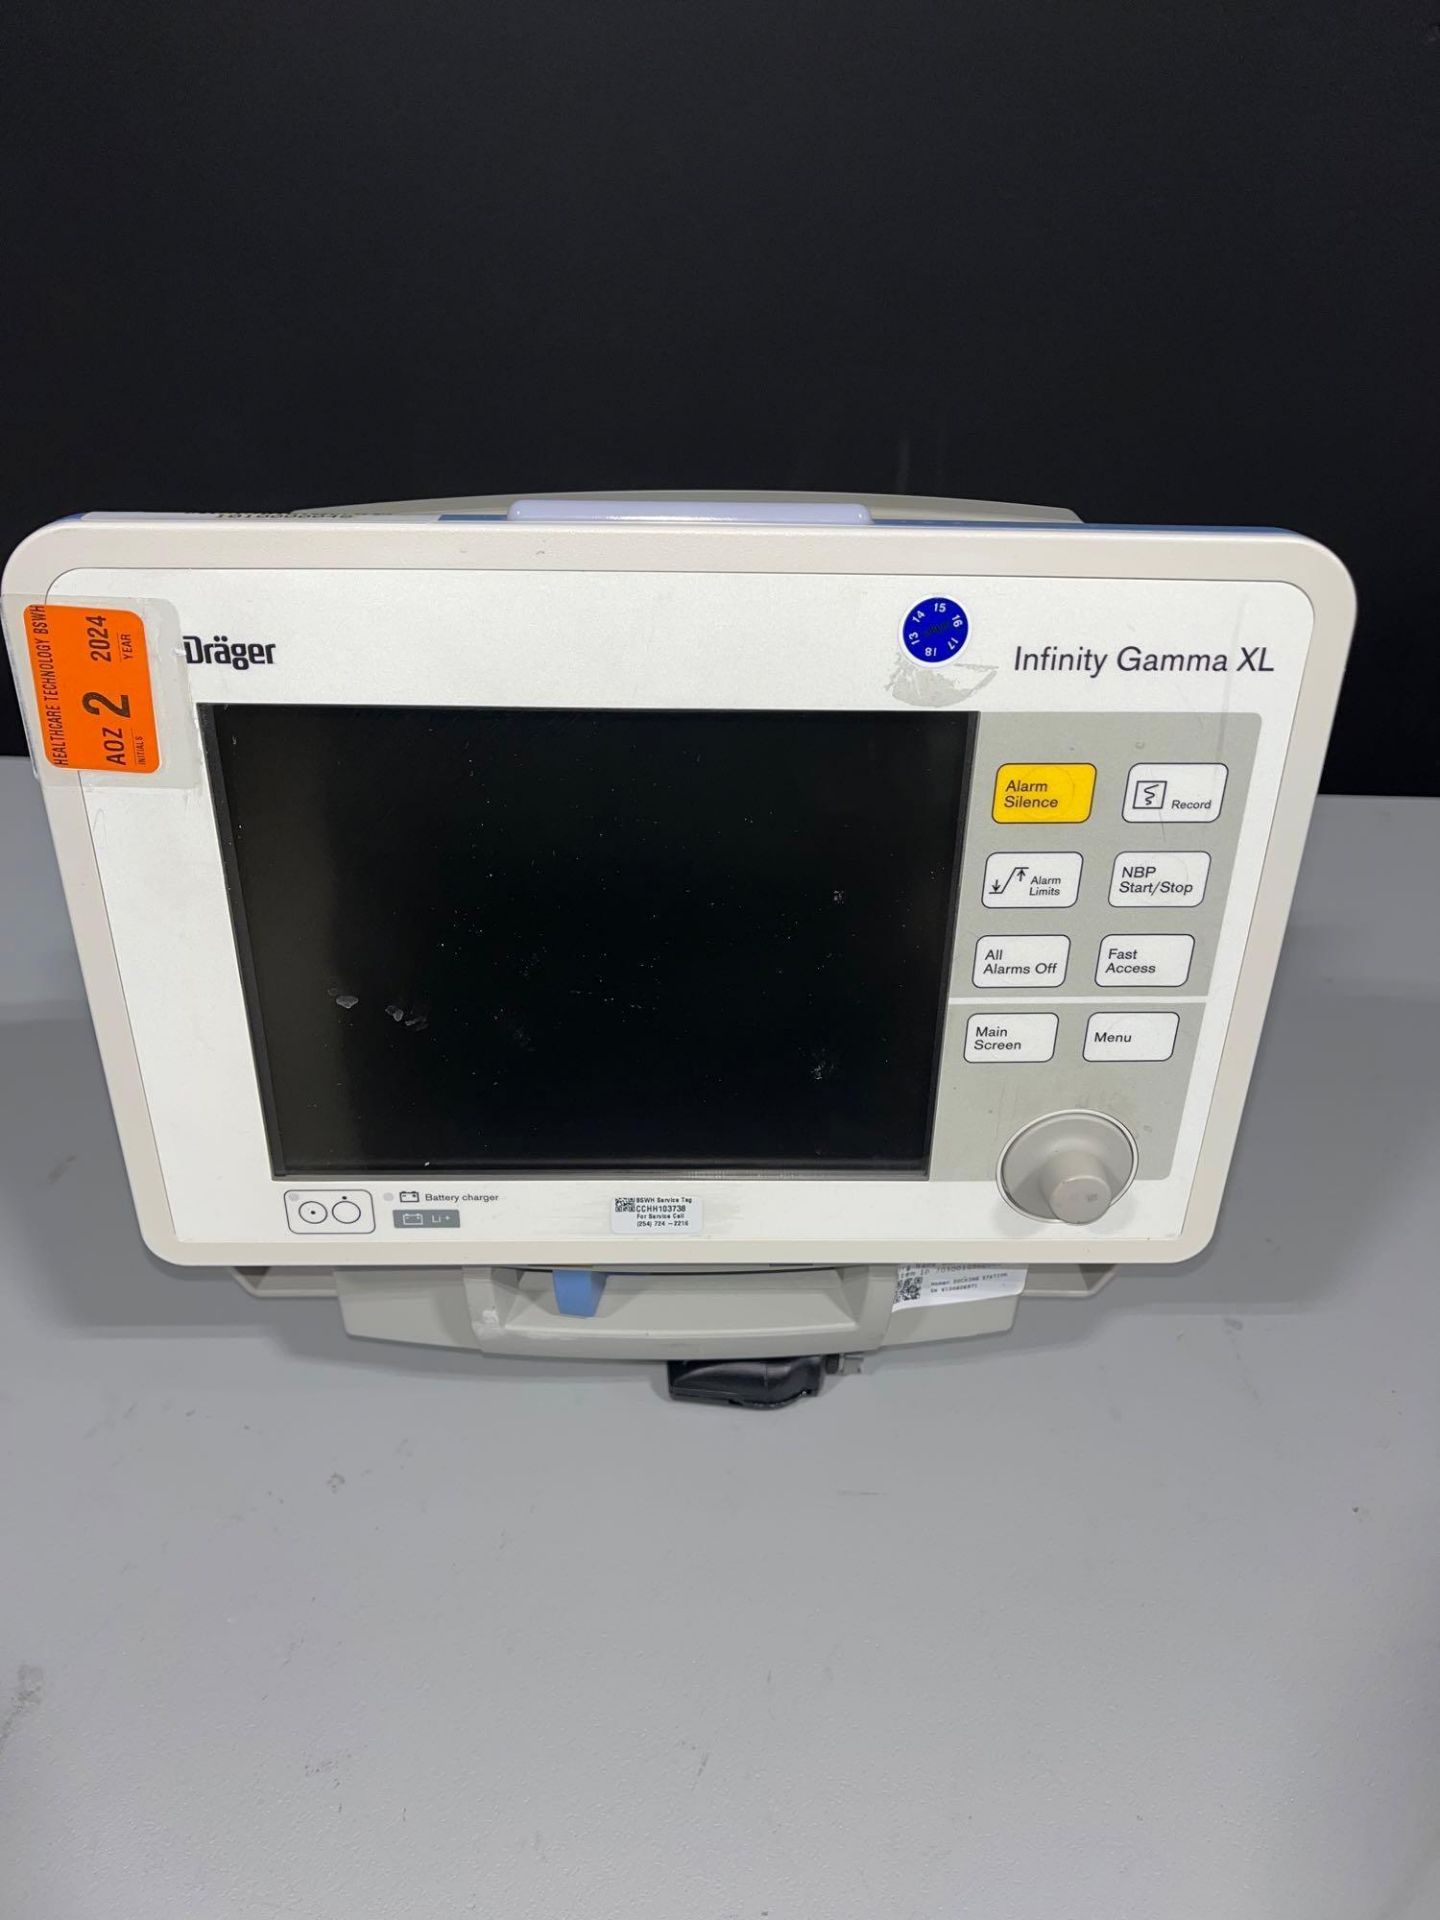 DRAGER INFINITY GAMMA XL PATIENT MONITOR - Image 2 of 6